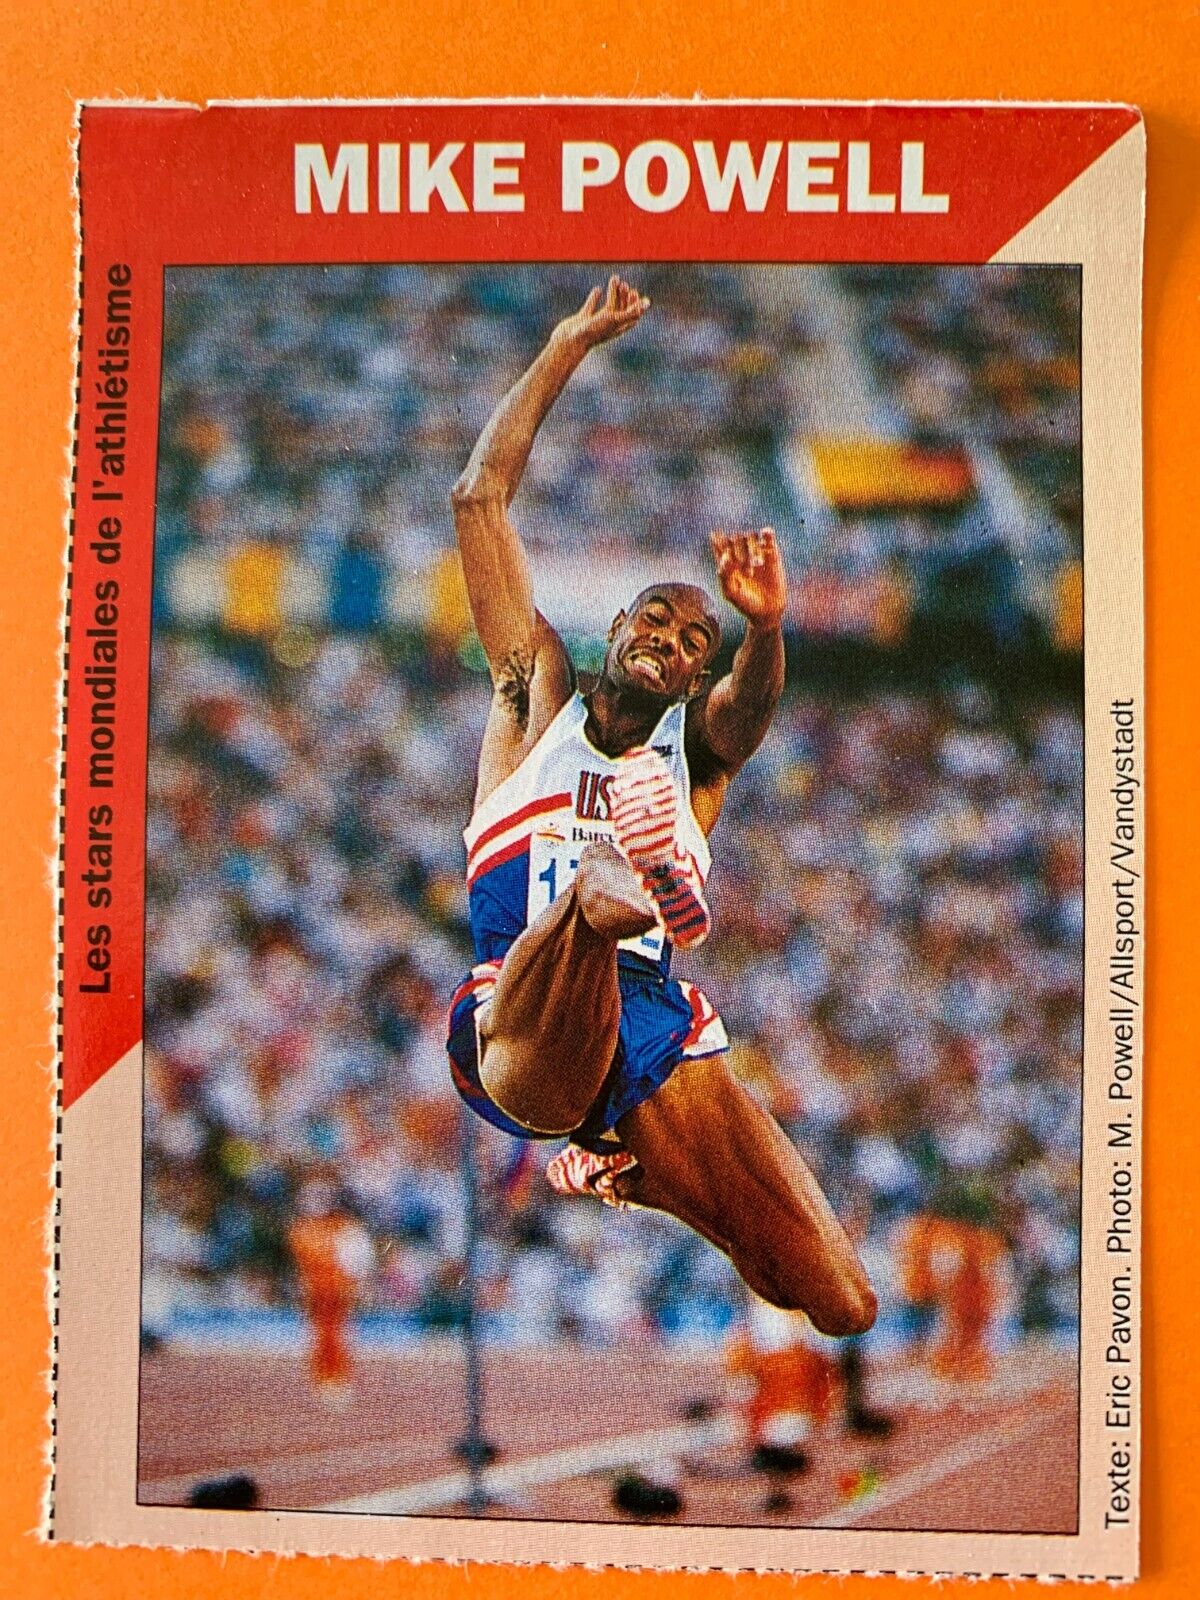 1993 ATHLETICS OLYMPIC GAMES STAR ROOKIE CARD MIKE POWELL FRENCH EDITION